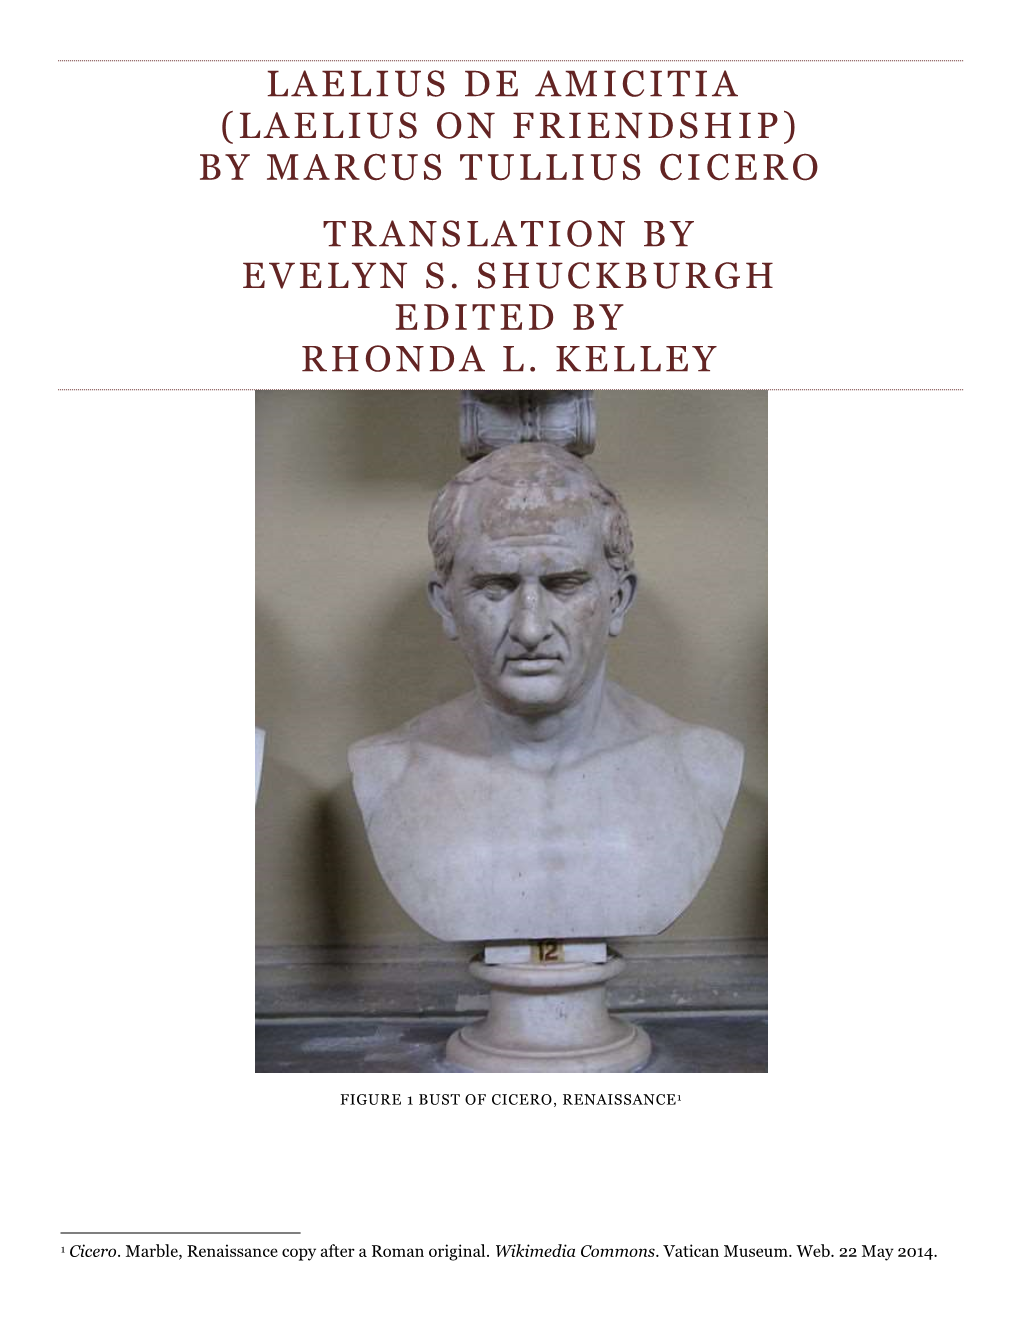 (Laelius on Friendship) by Marcus Tullius Cicero Translation by Evelyn S